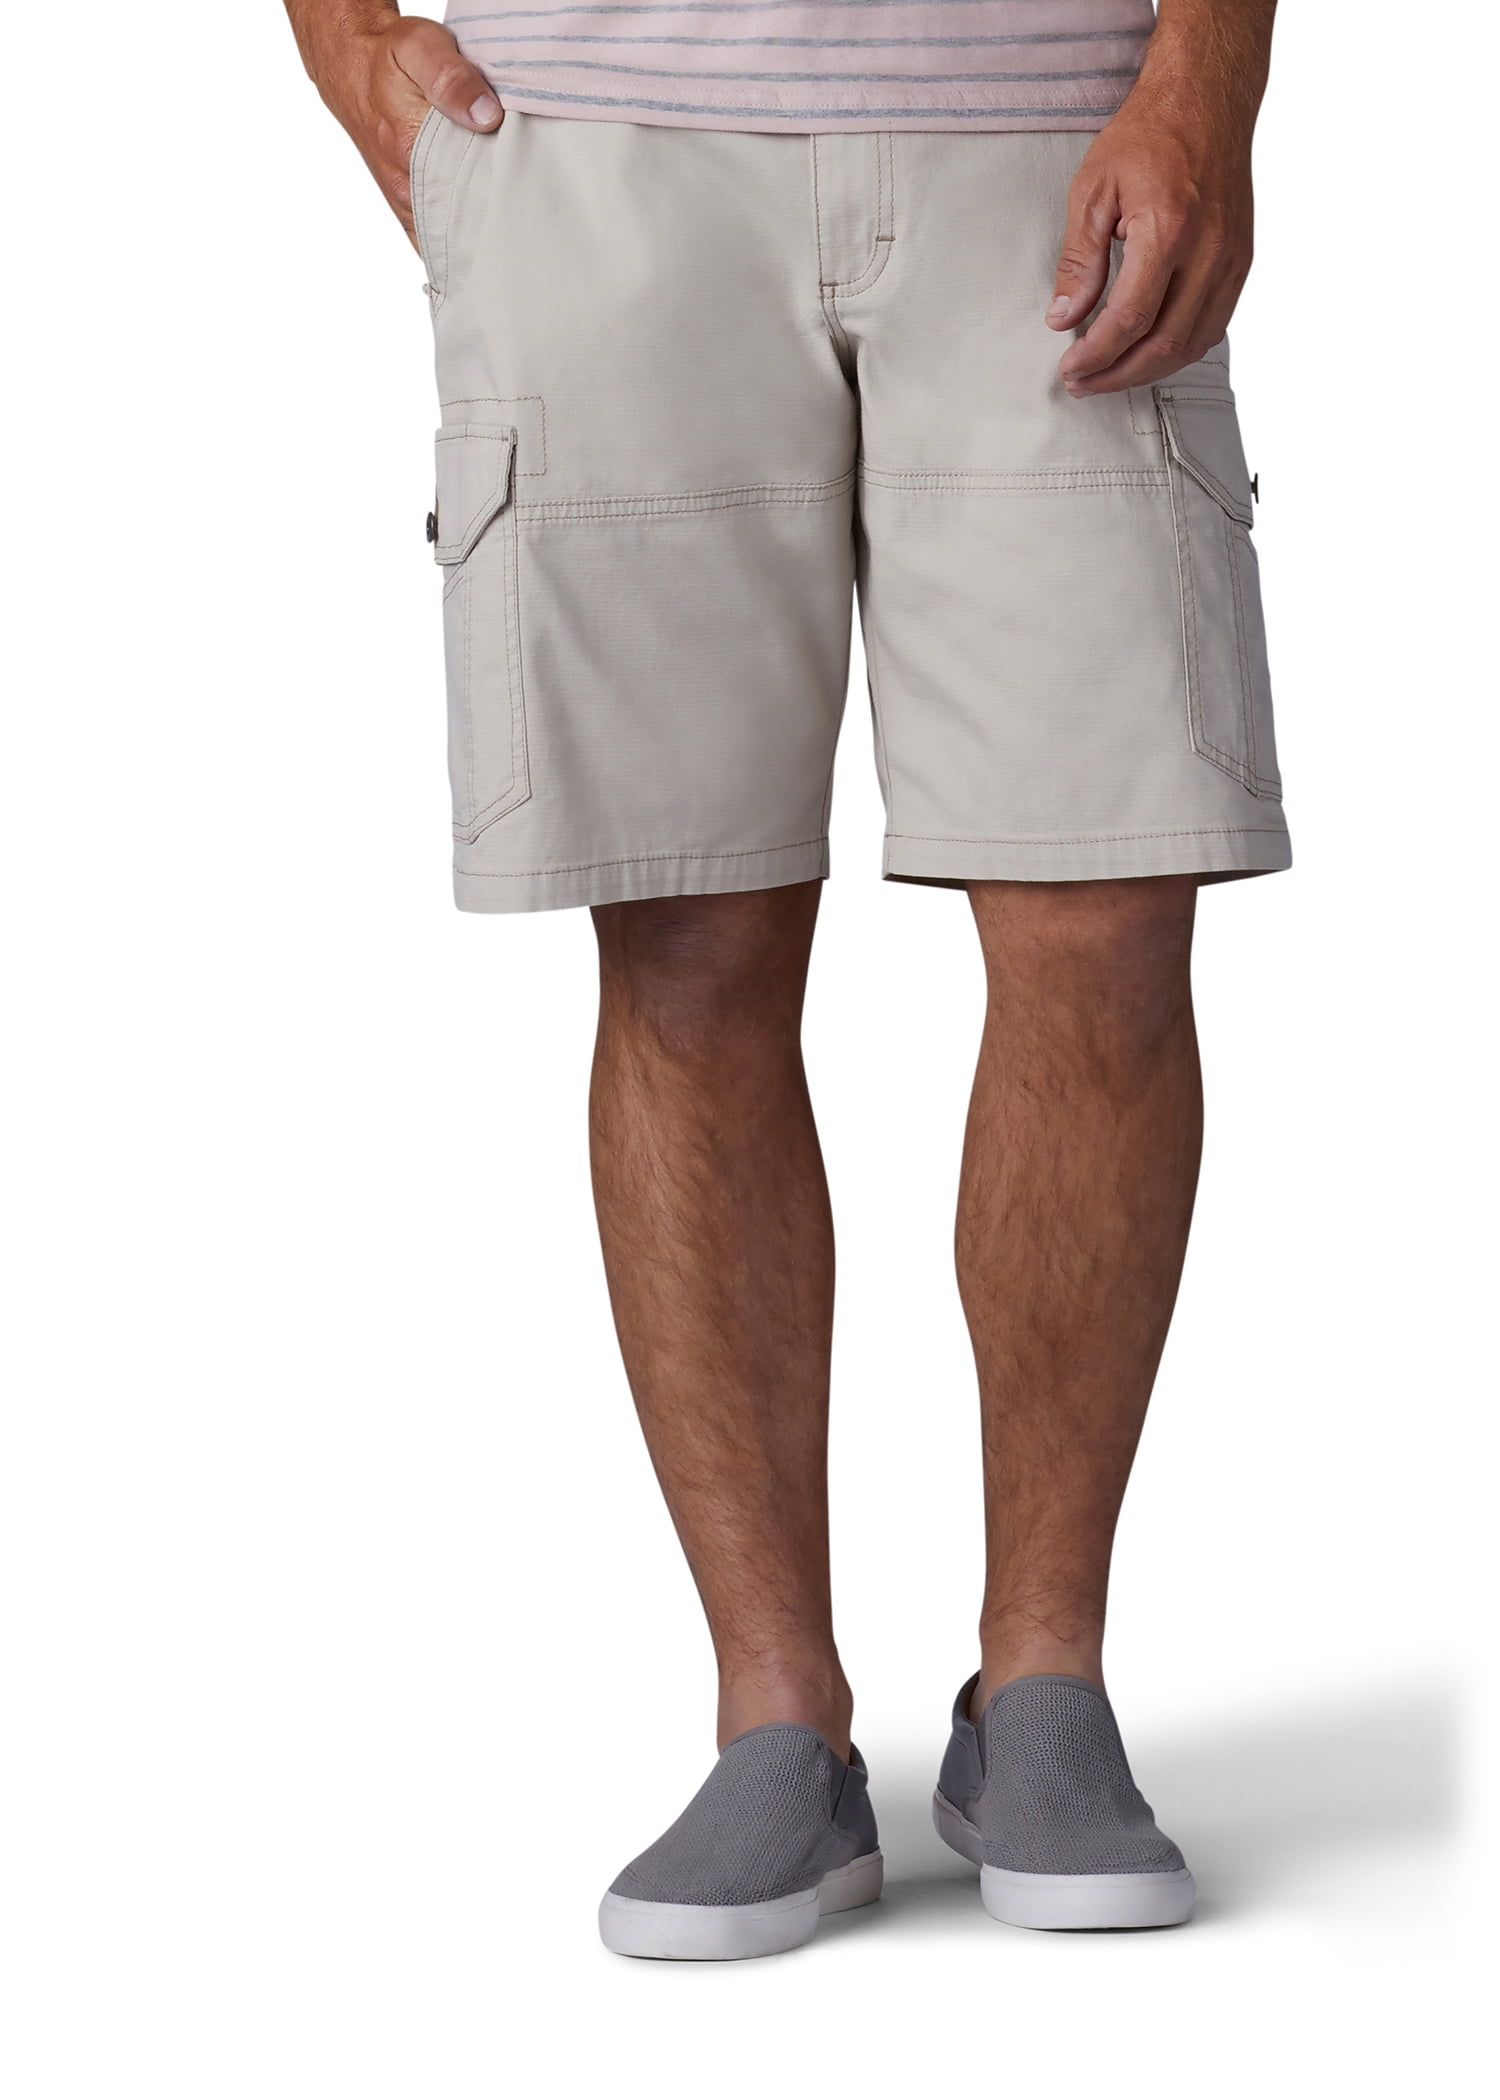 Lee Cooper New Classic Cargo Shorts Mens Short Trousers Cargo-pockets Waistband 